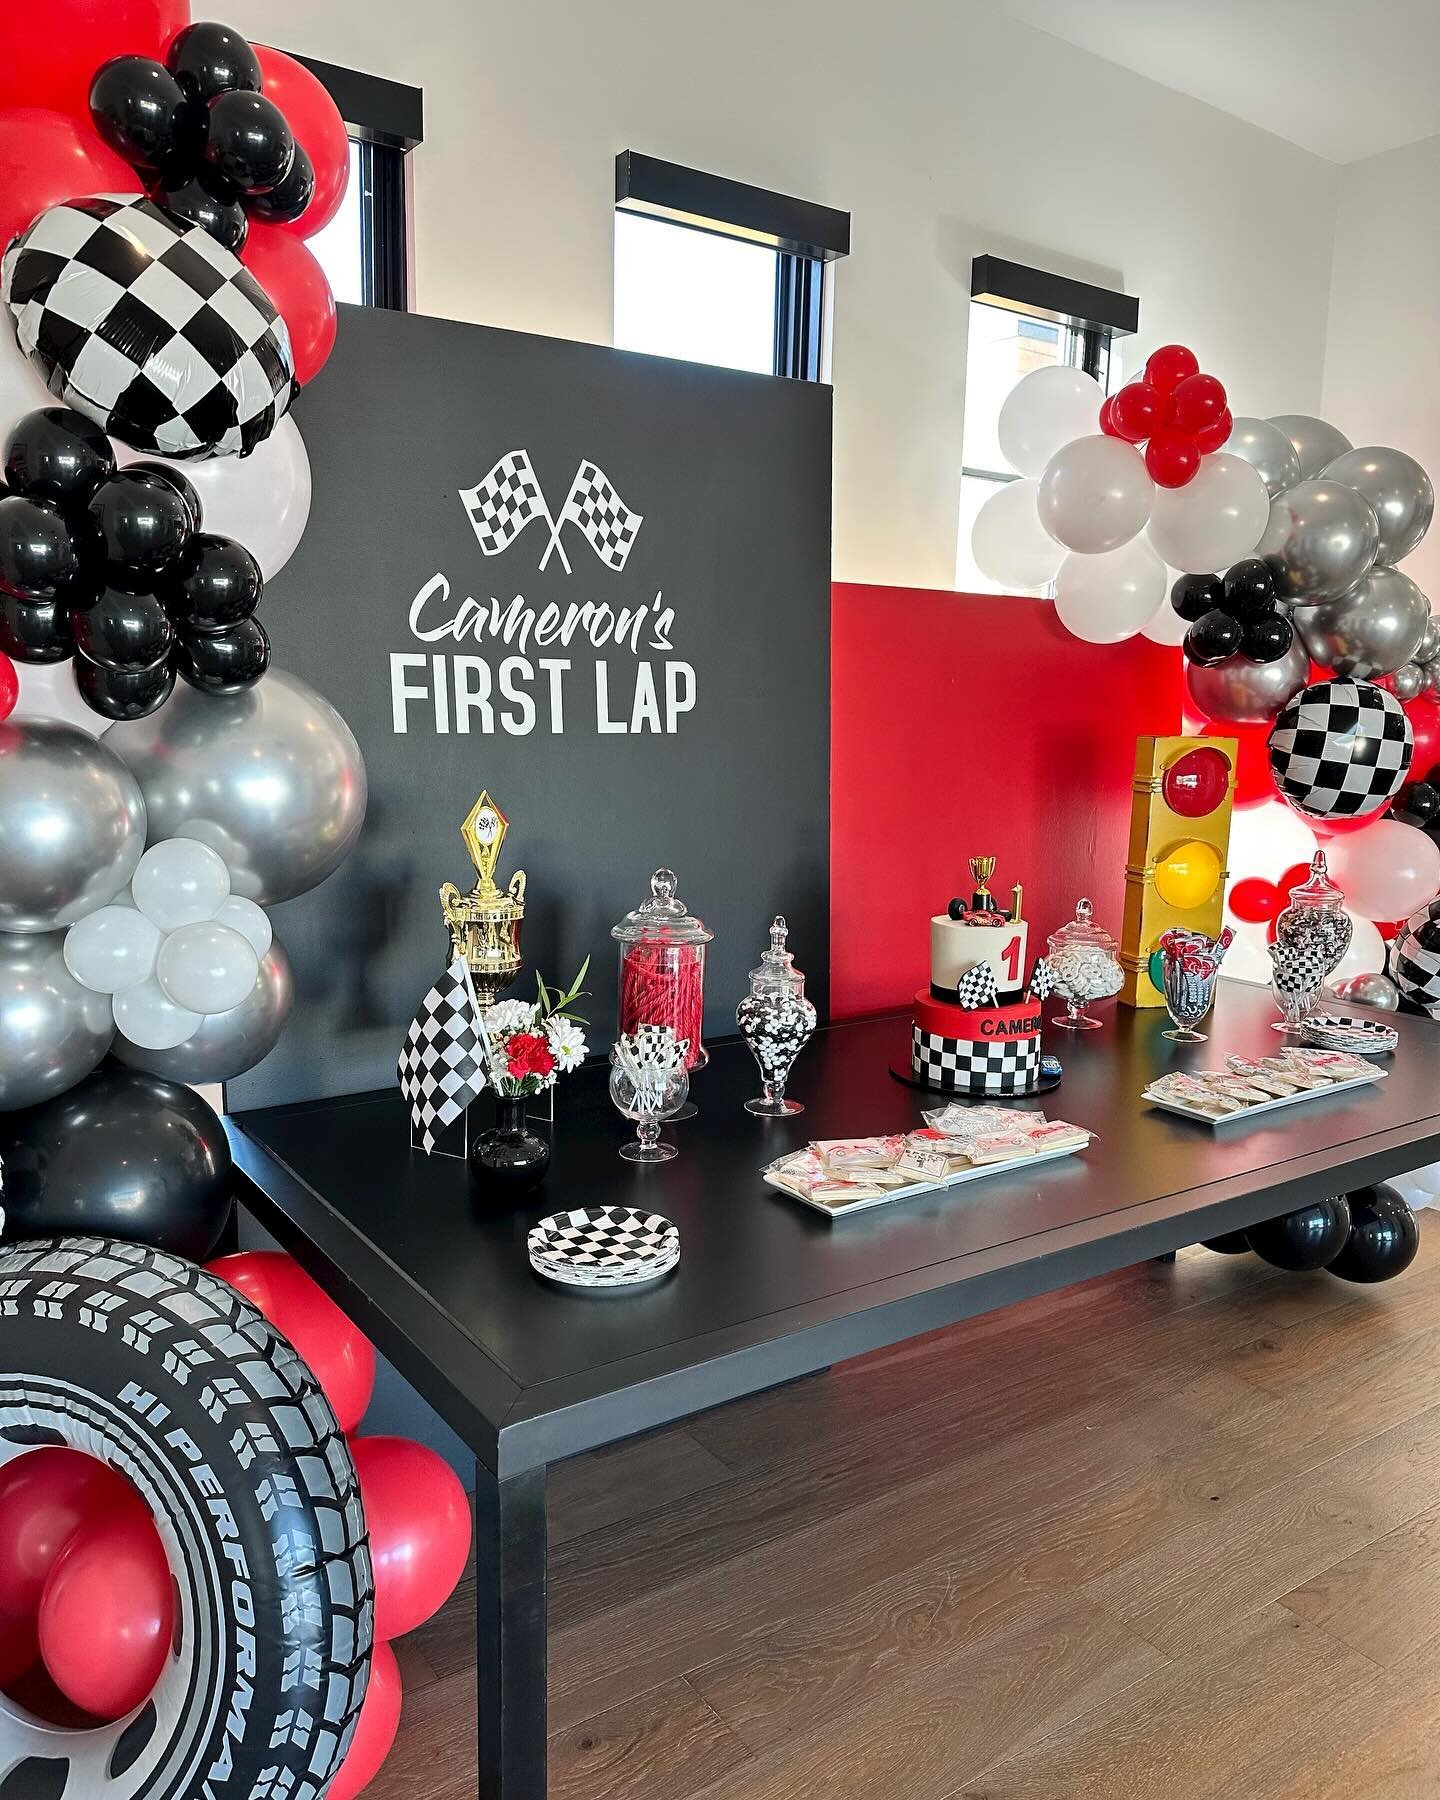 We&rsquo;re in full party mode over here, gearing up for another party this weekend! In fact, it&rsquo;s another repeat client! We have quite a few of those and love working with families again and again ❤️

#formulaonebirthday #racingbirthday #boybi